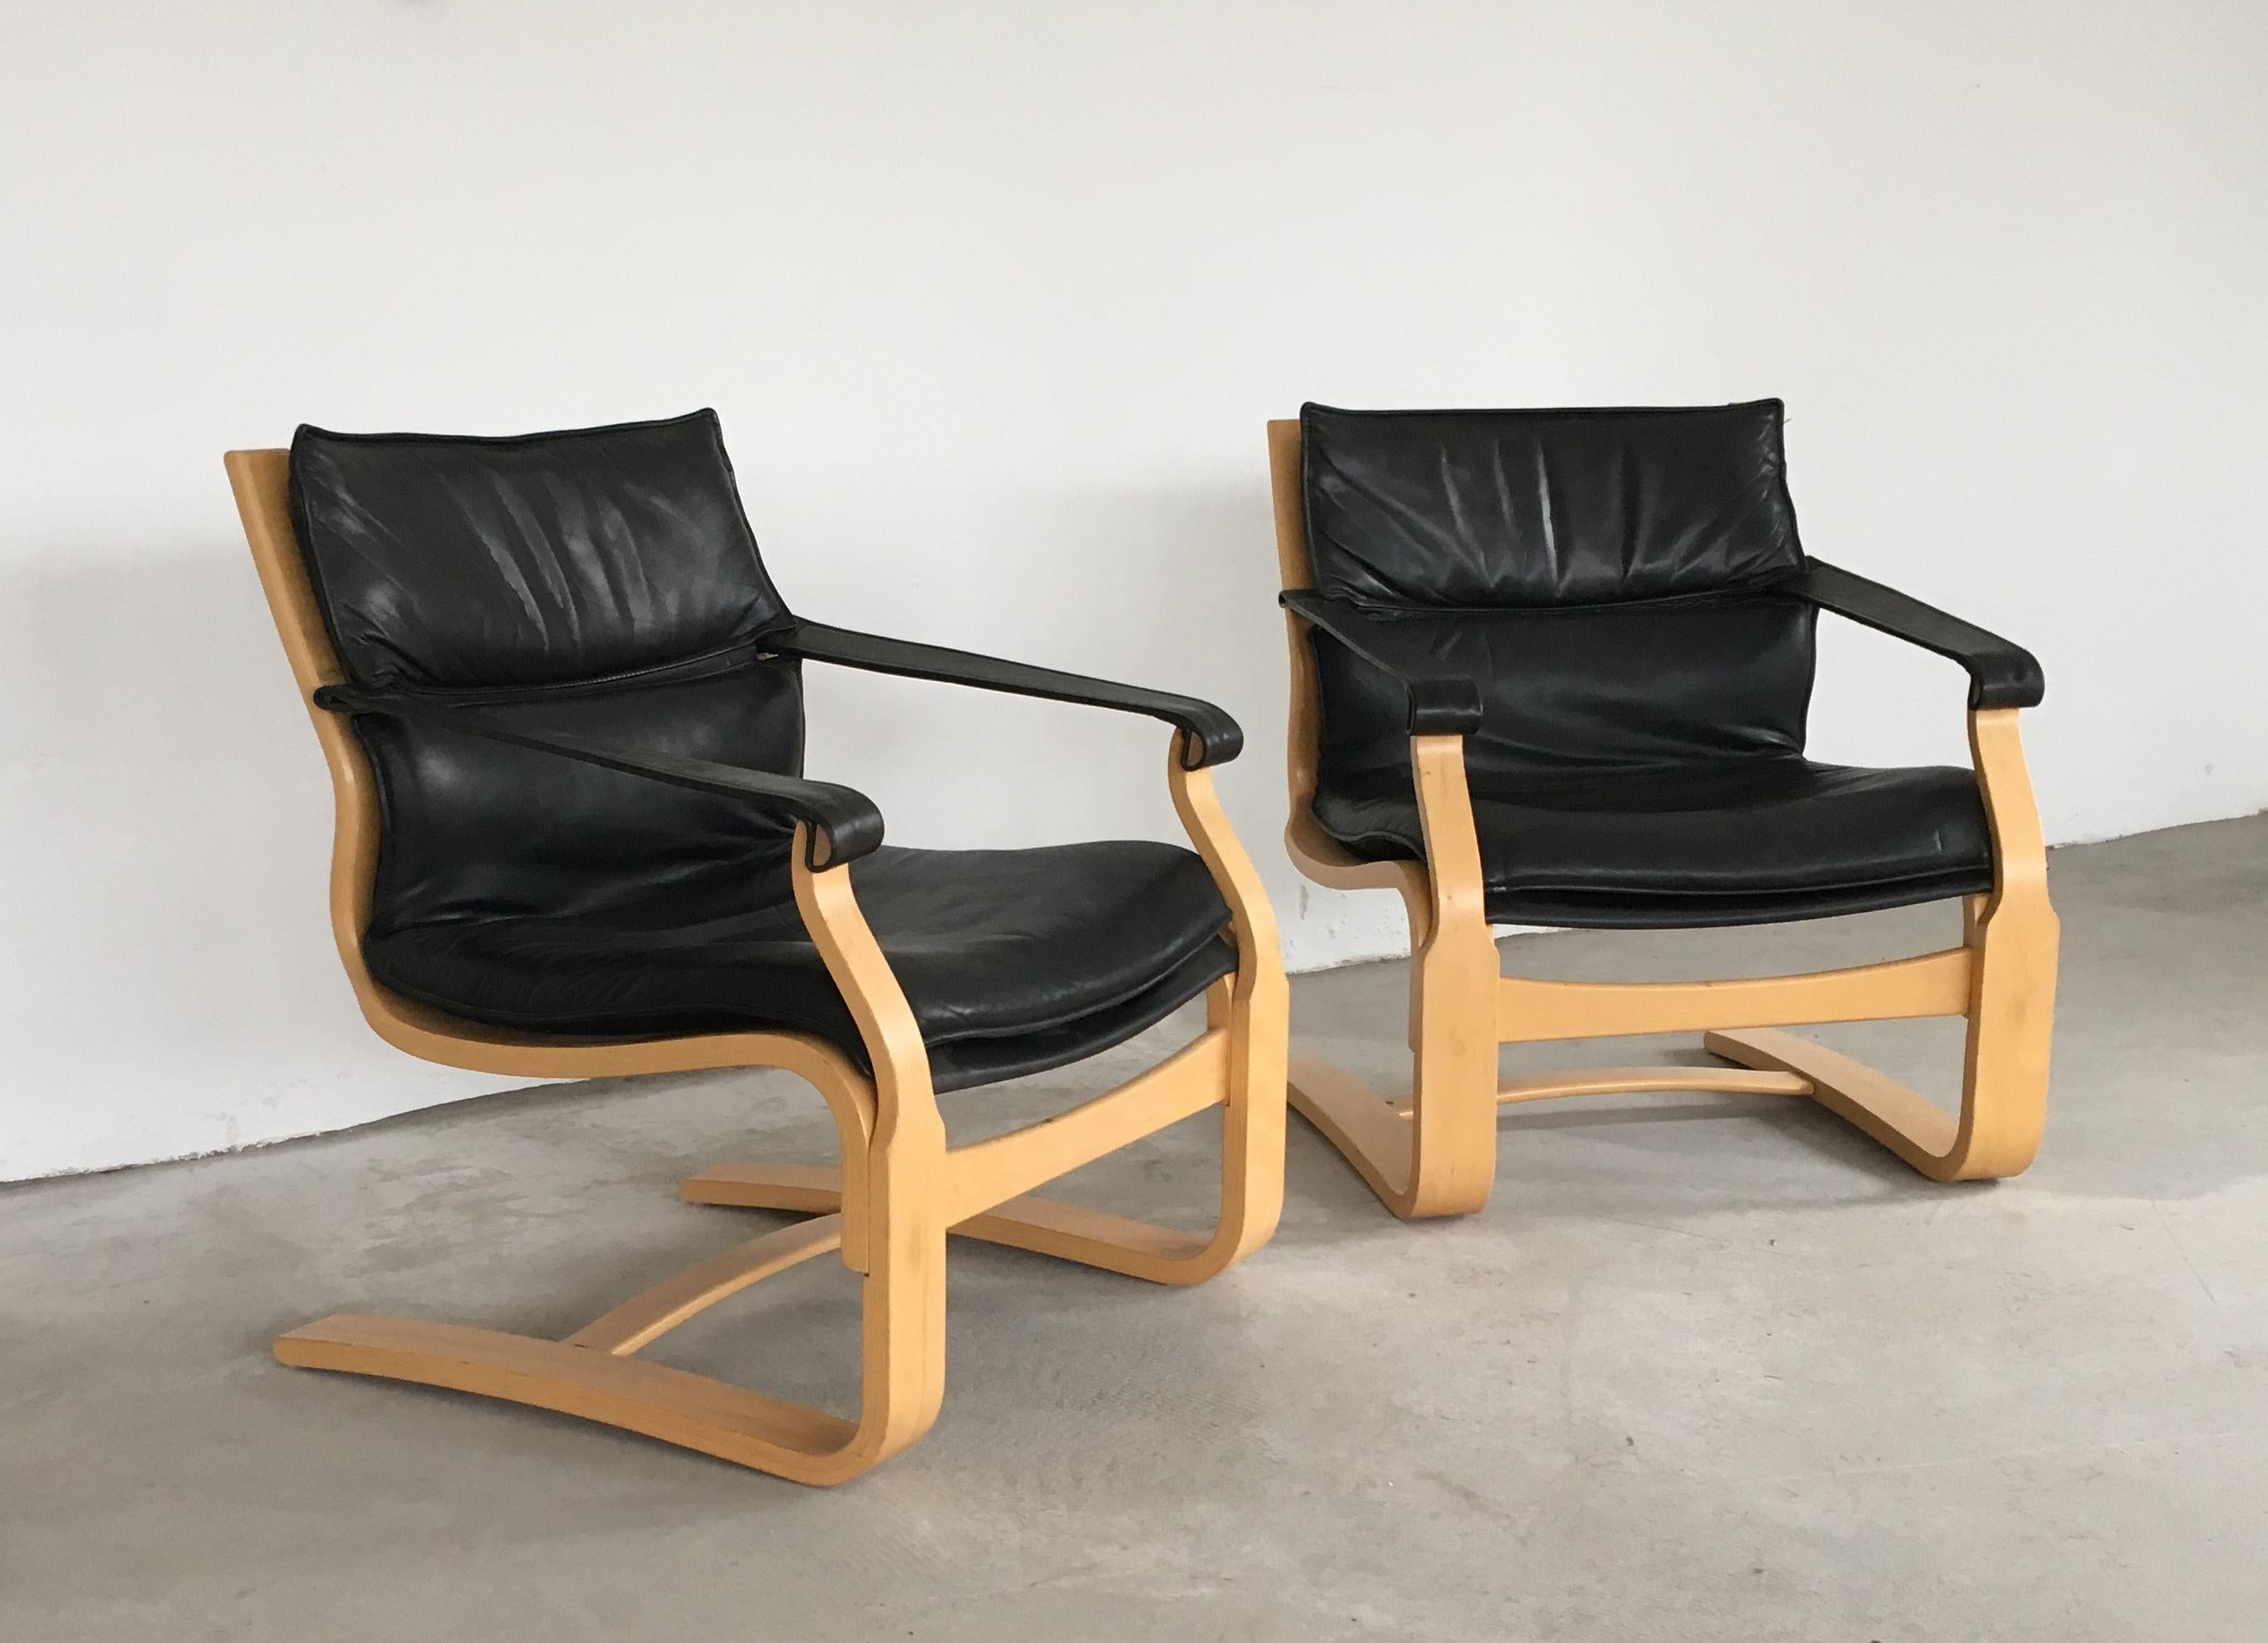 Pair of Åke Fribytter lounge chairs in beech and black leather by Nelo

The two comfortable lounge chairs have been examined by our cabinetmaker to ensure they are in good condition with only few and minor signs of age and use. 
The original leather